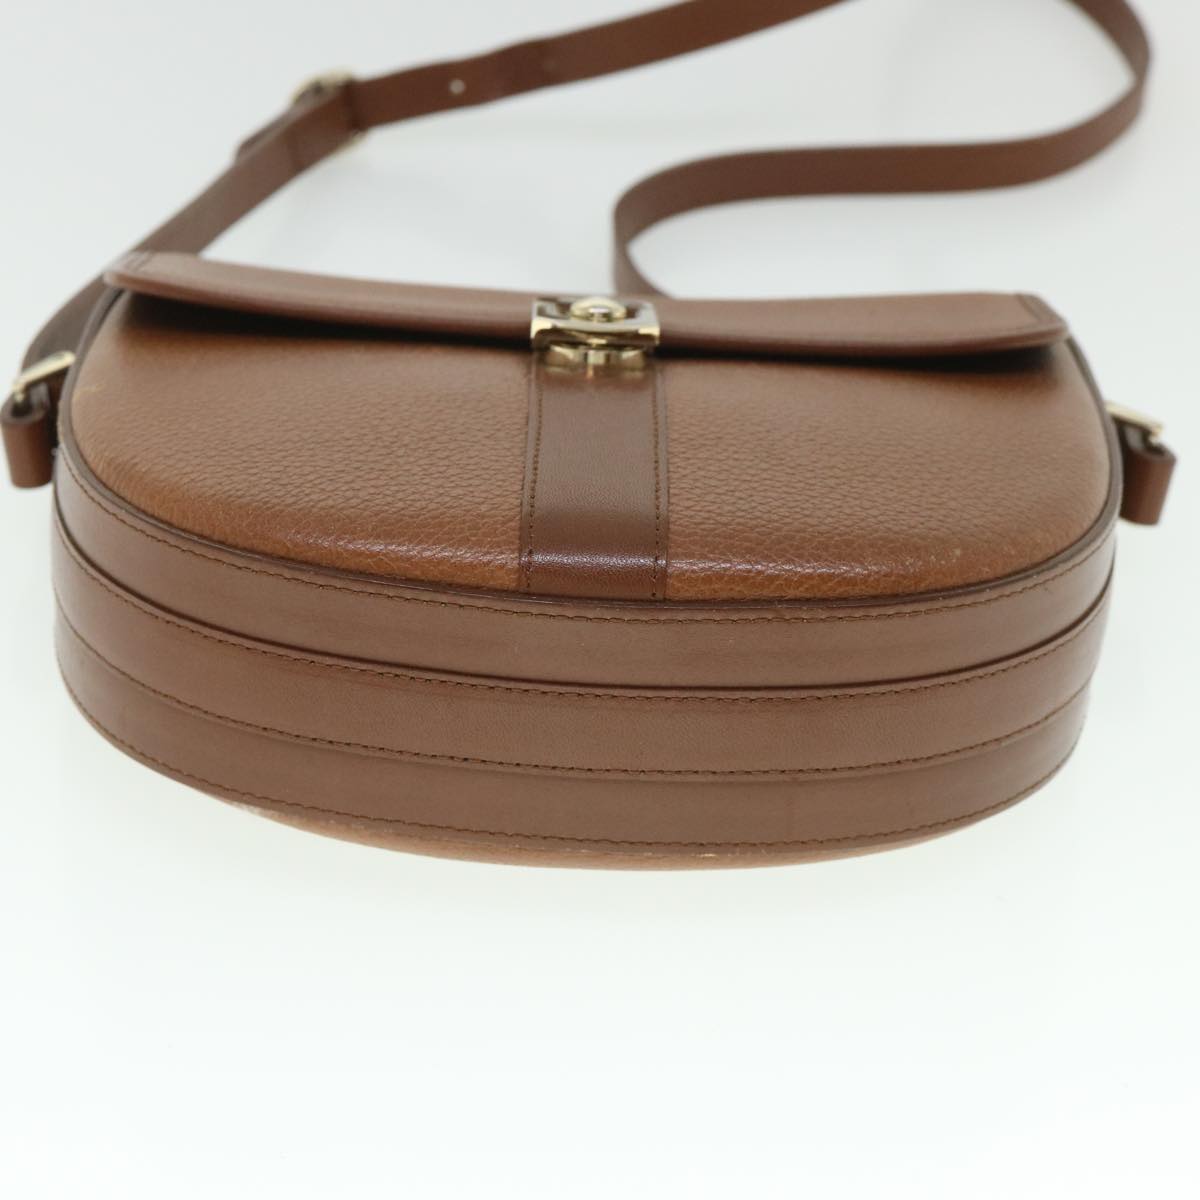 Burberrys Shoulder Bag Leather Brown Auth bs8541